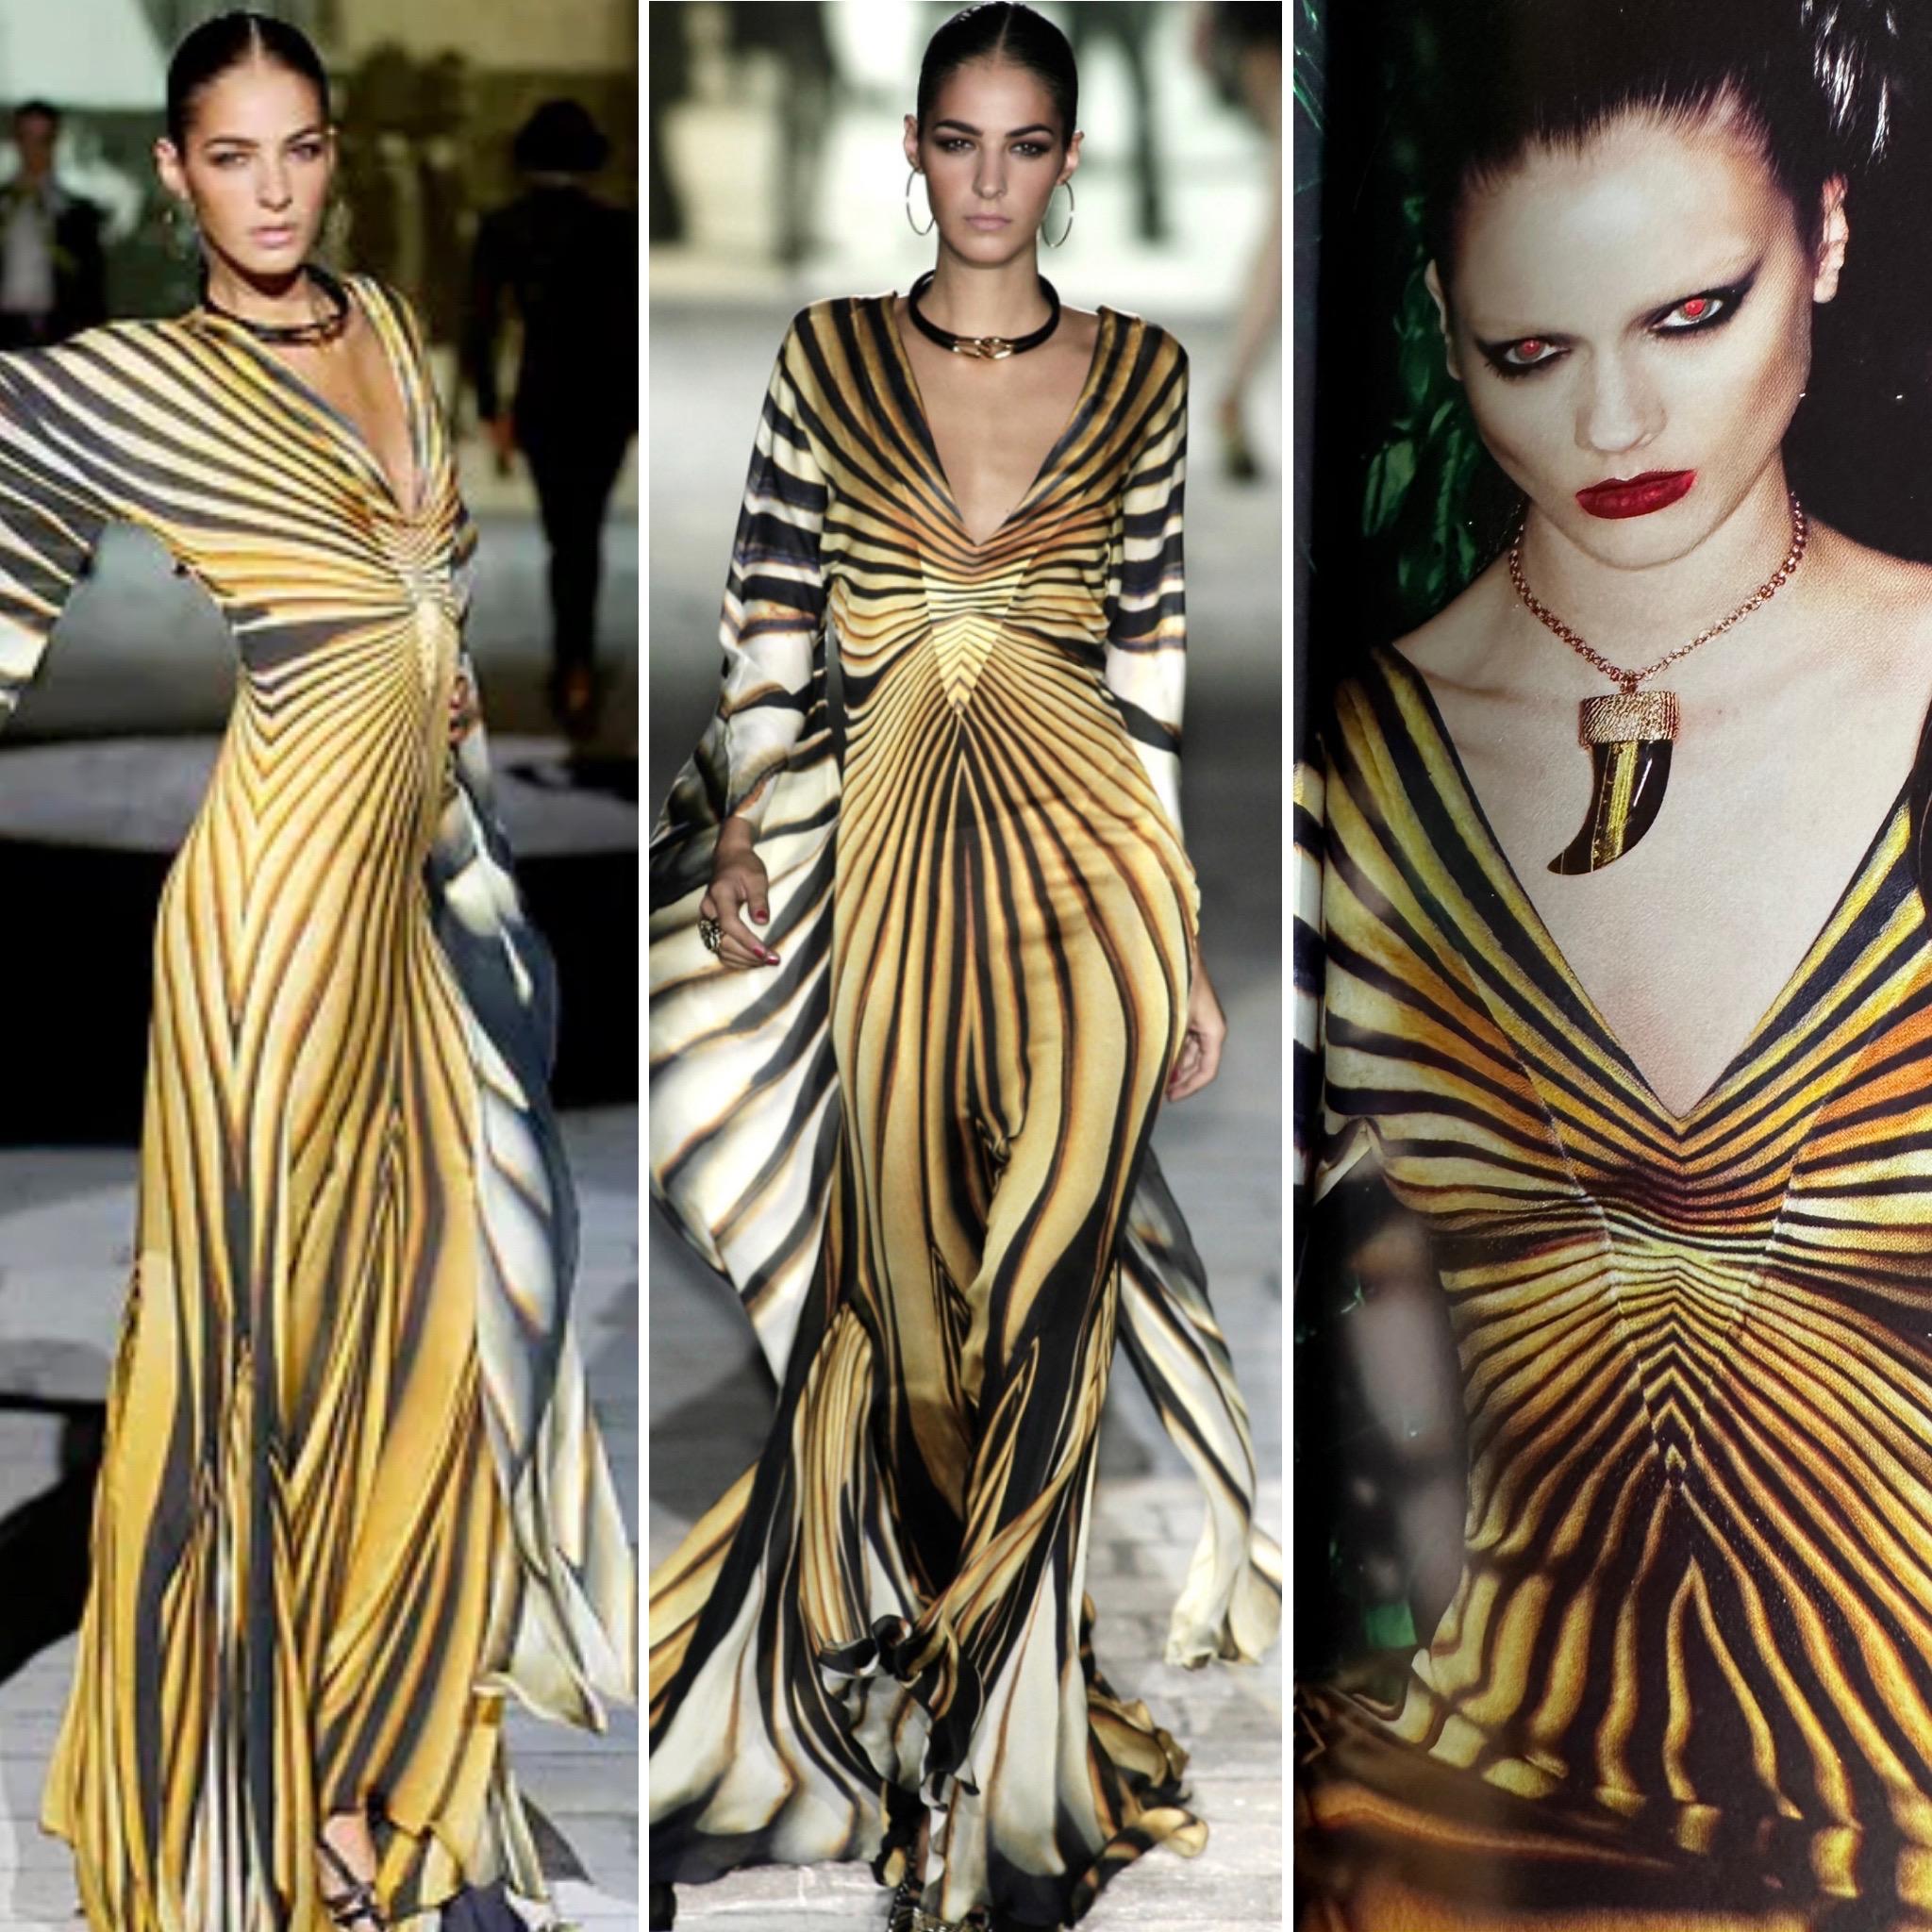 Roberto Cavalli Spring 2007 Butterfly Stripe Silk Evening Dress In Excellent Condition For Sale In Cloverdale, CA